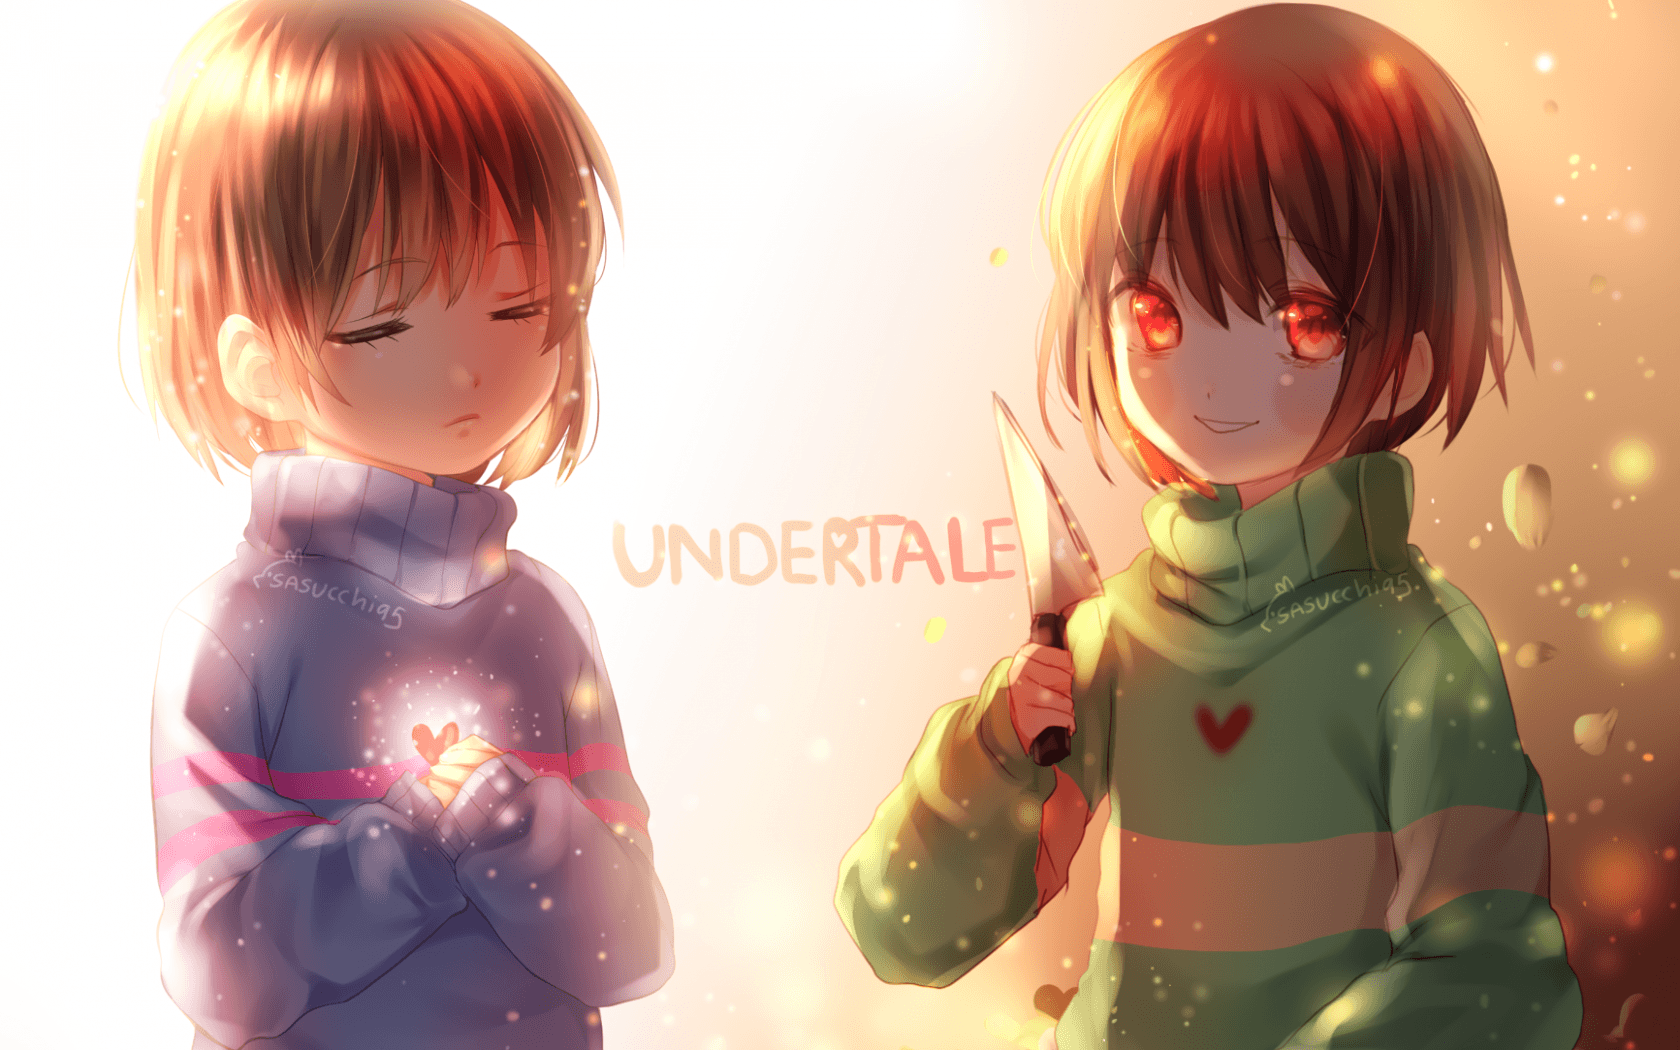 Download 1680x1050 Undertale, Frisk, Chara, Anime Style Wallpaper